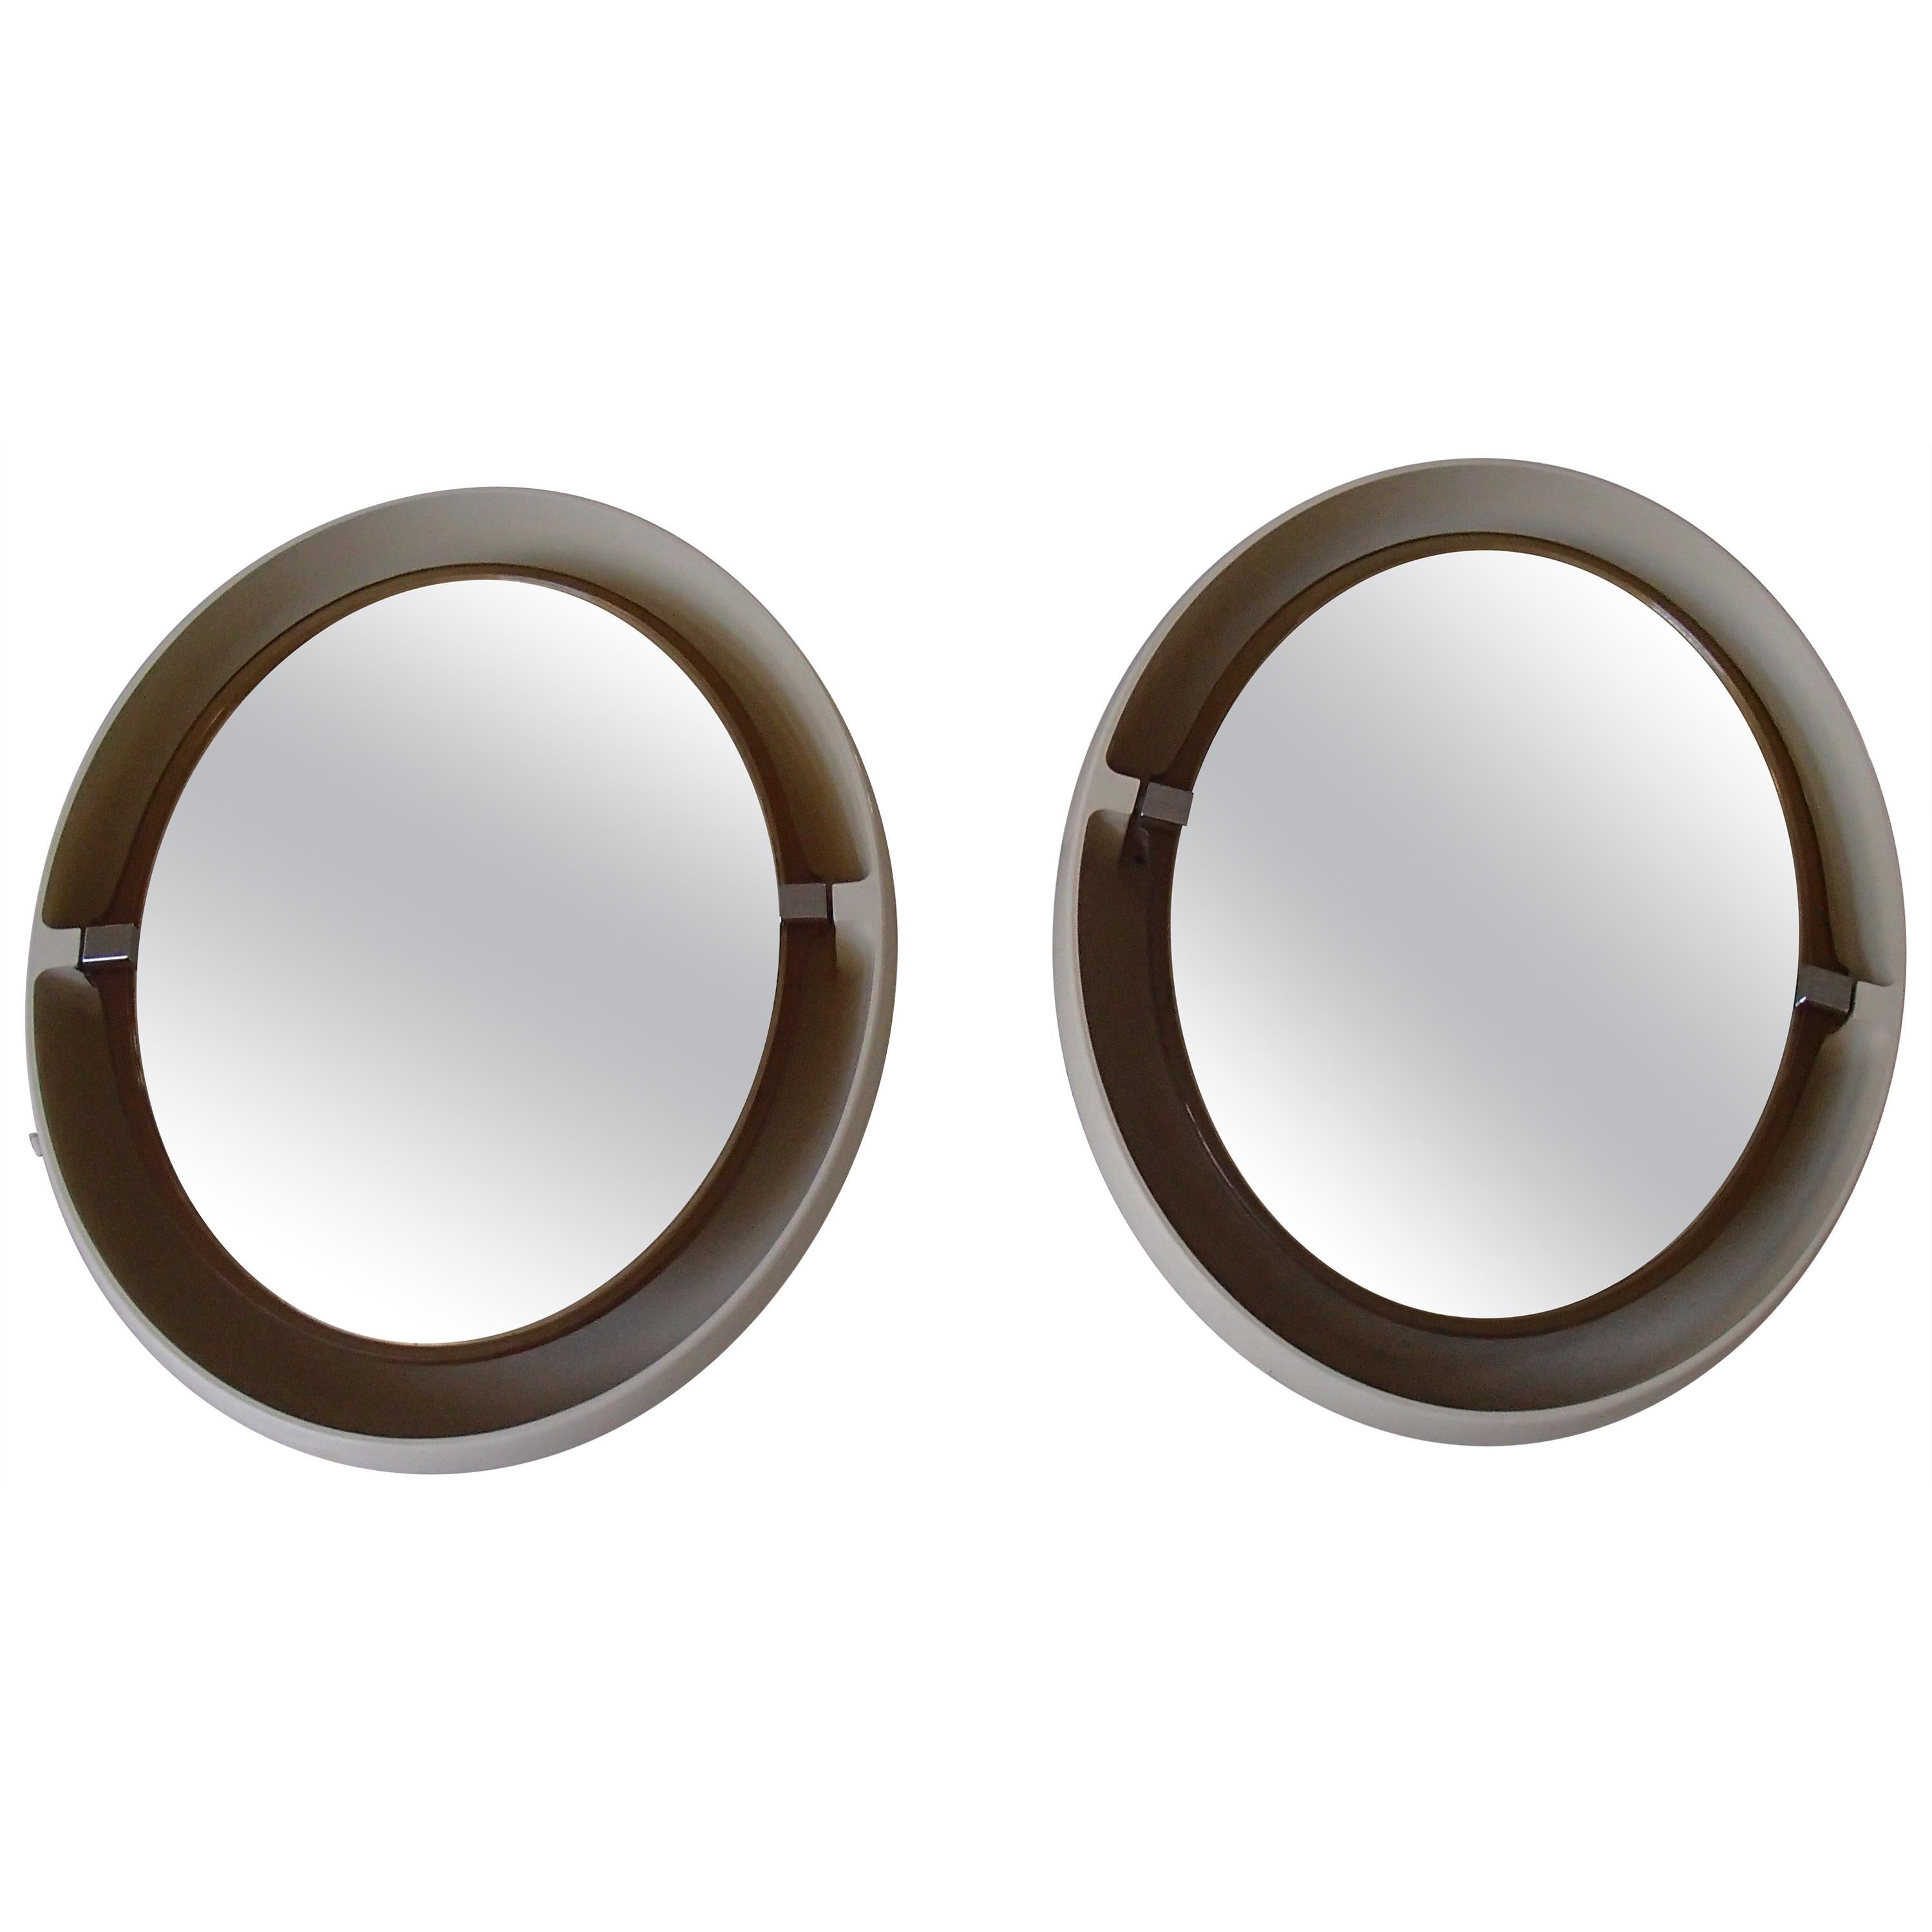 Pair of Midcentury Oval Movable Bathroom Mirrors with 4 Bulbs